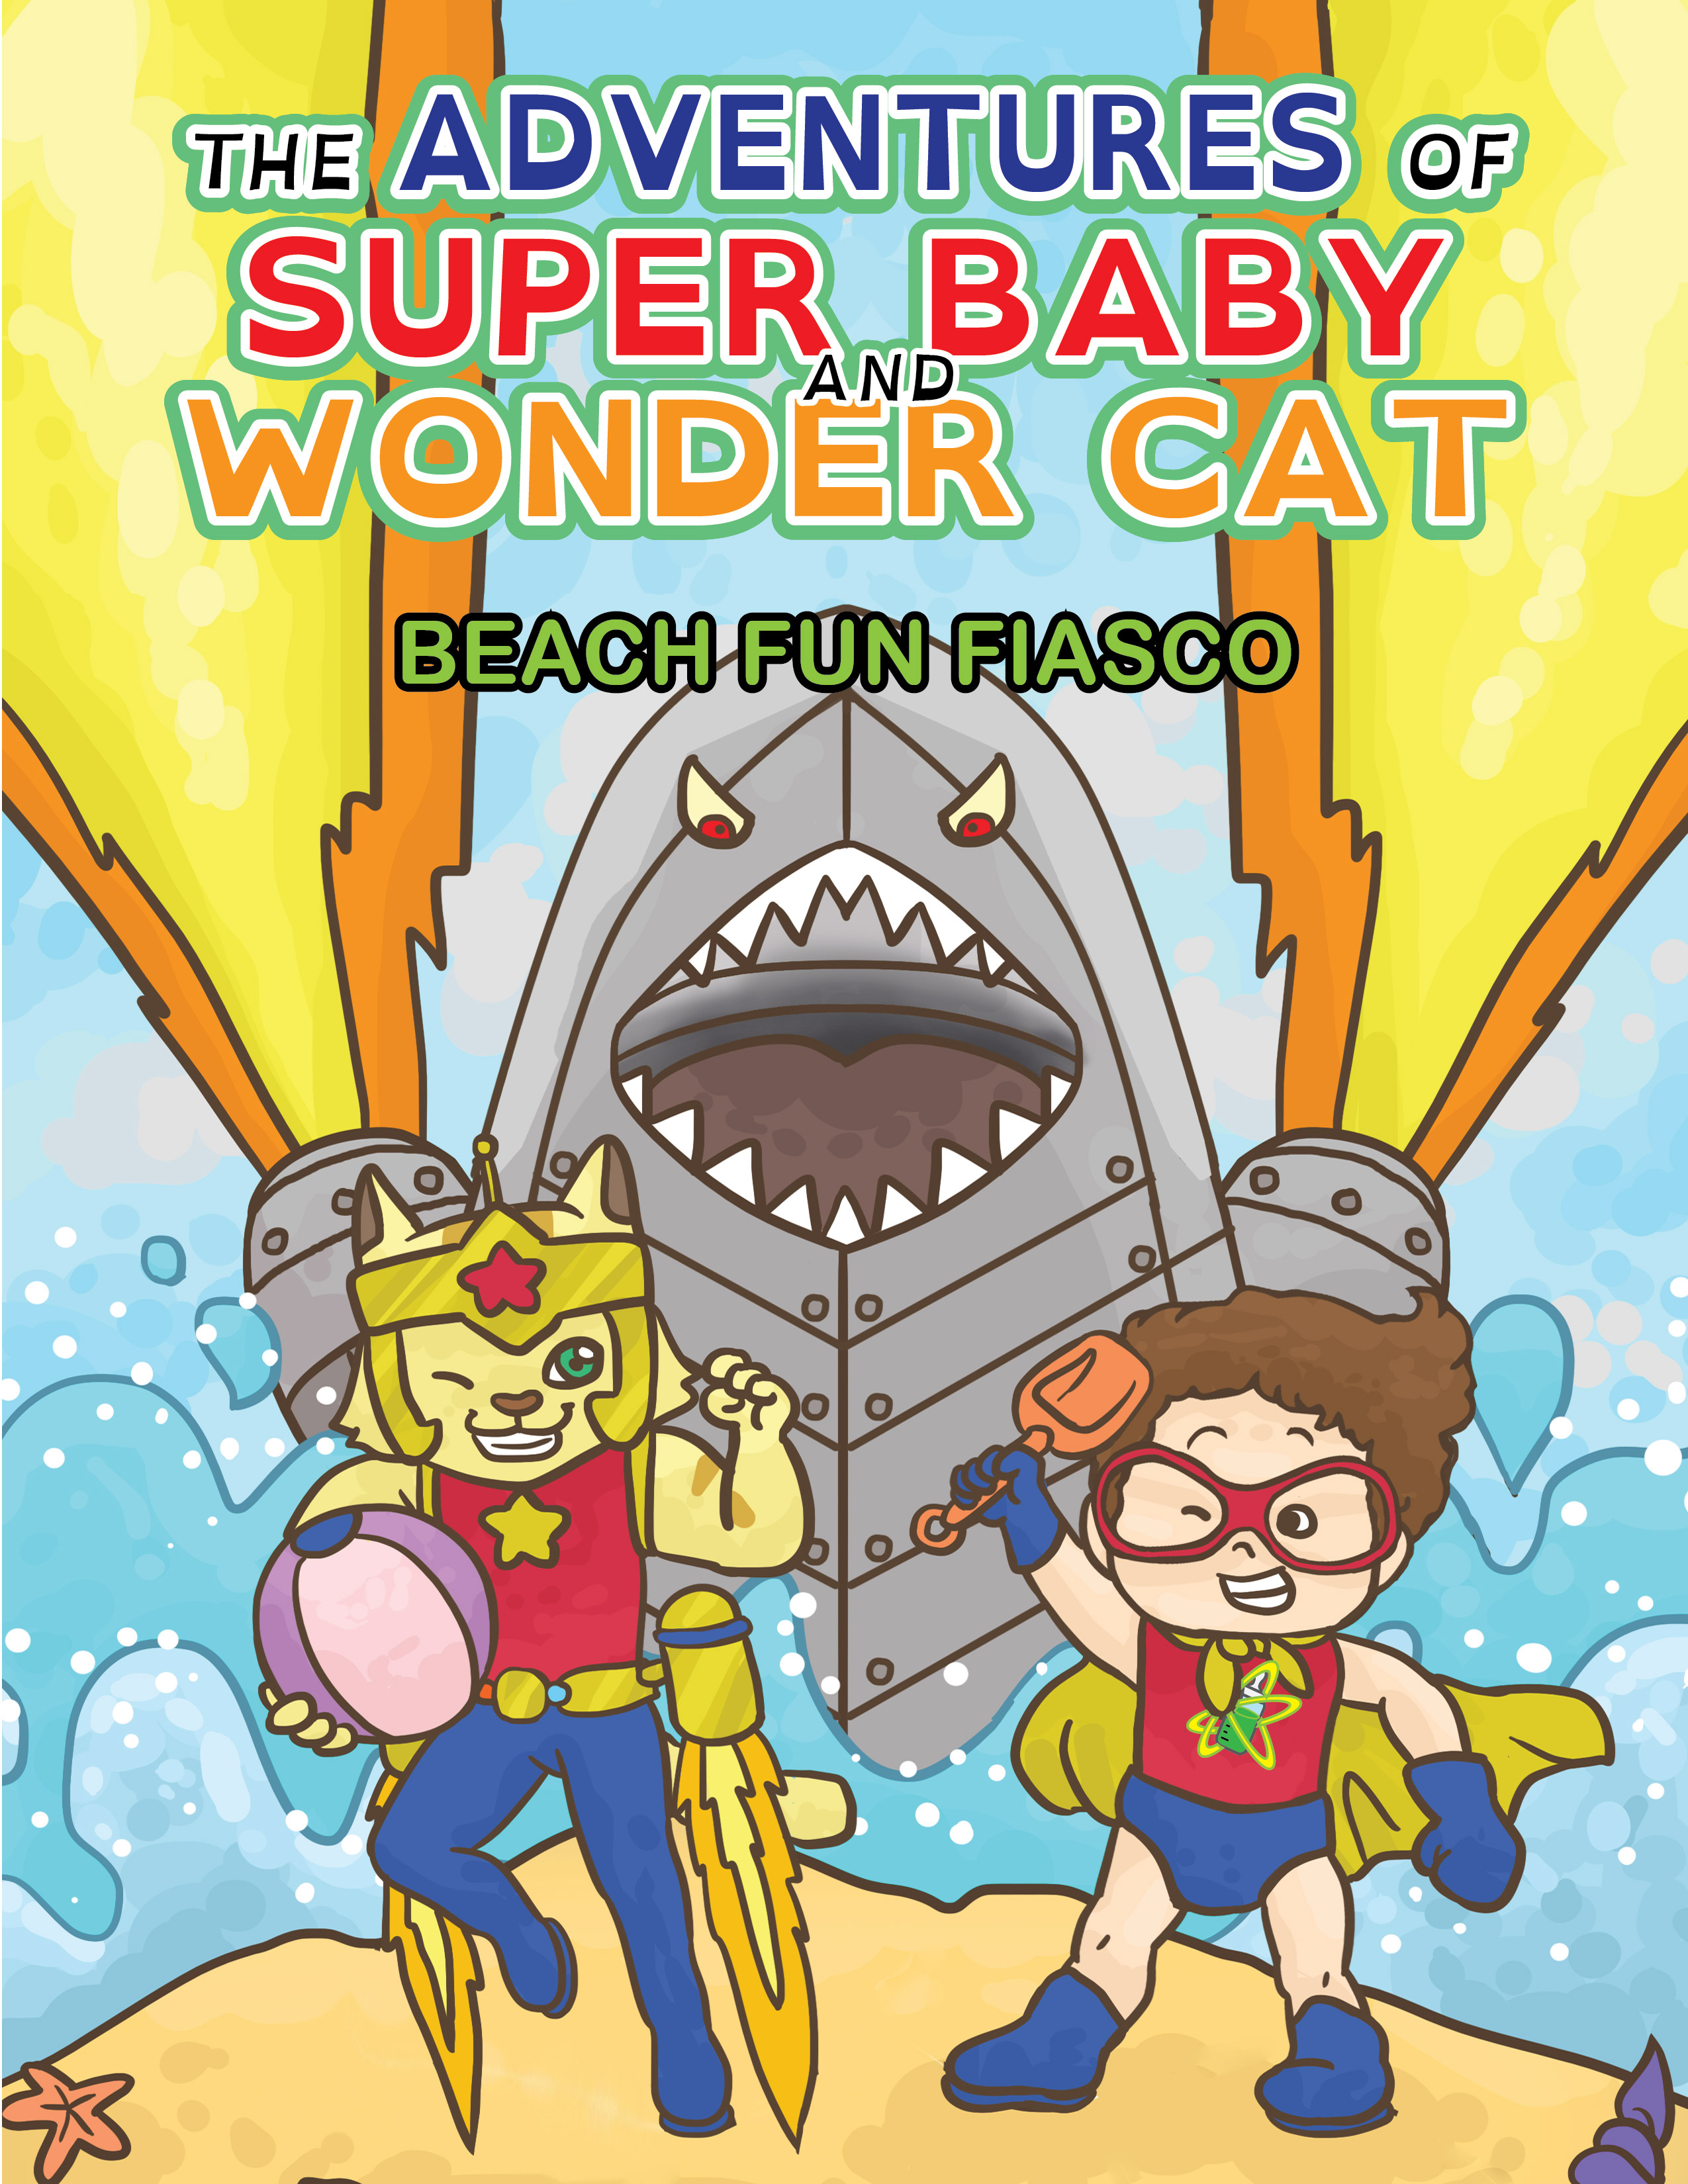 The Adventures of Super Baby background